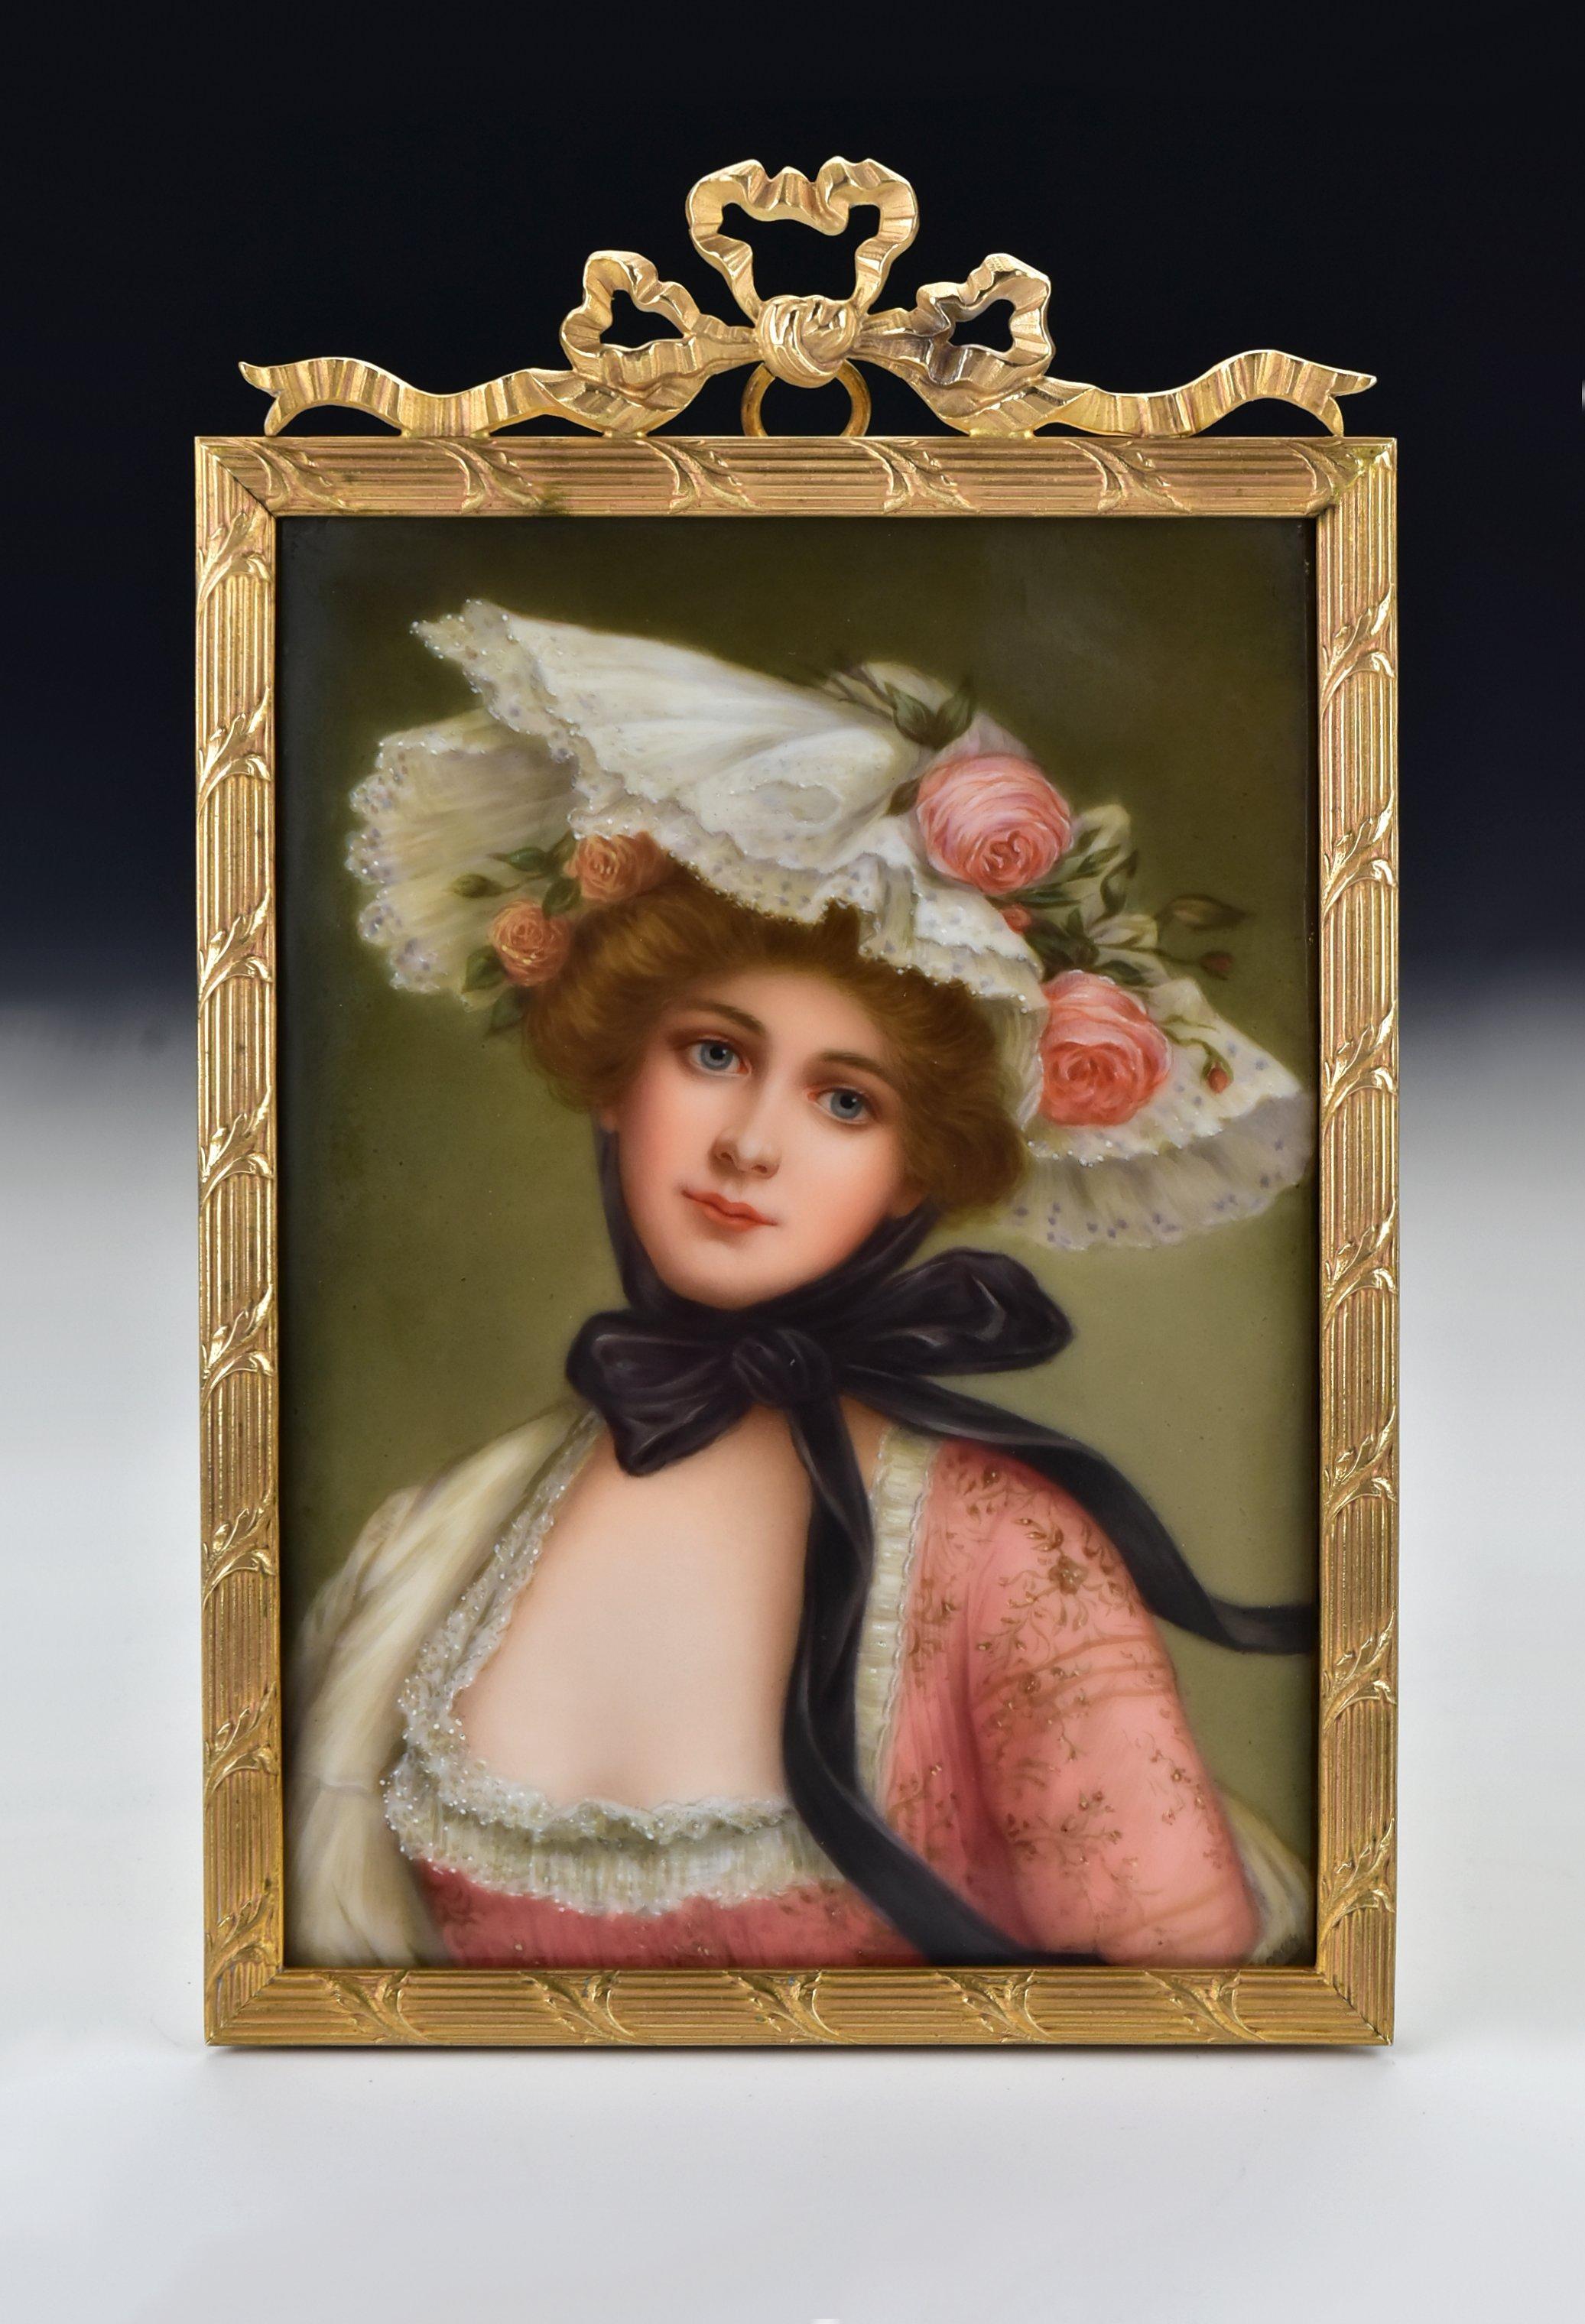 Description: Hand painted portrait on porcelain depicting a young woman with a large hat, artist signed Wagner on the front and marked on the back as shown, set in a fancy bronze frame.

Age: Late 19th century

Size: The painting alone measures